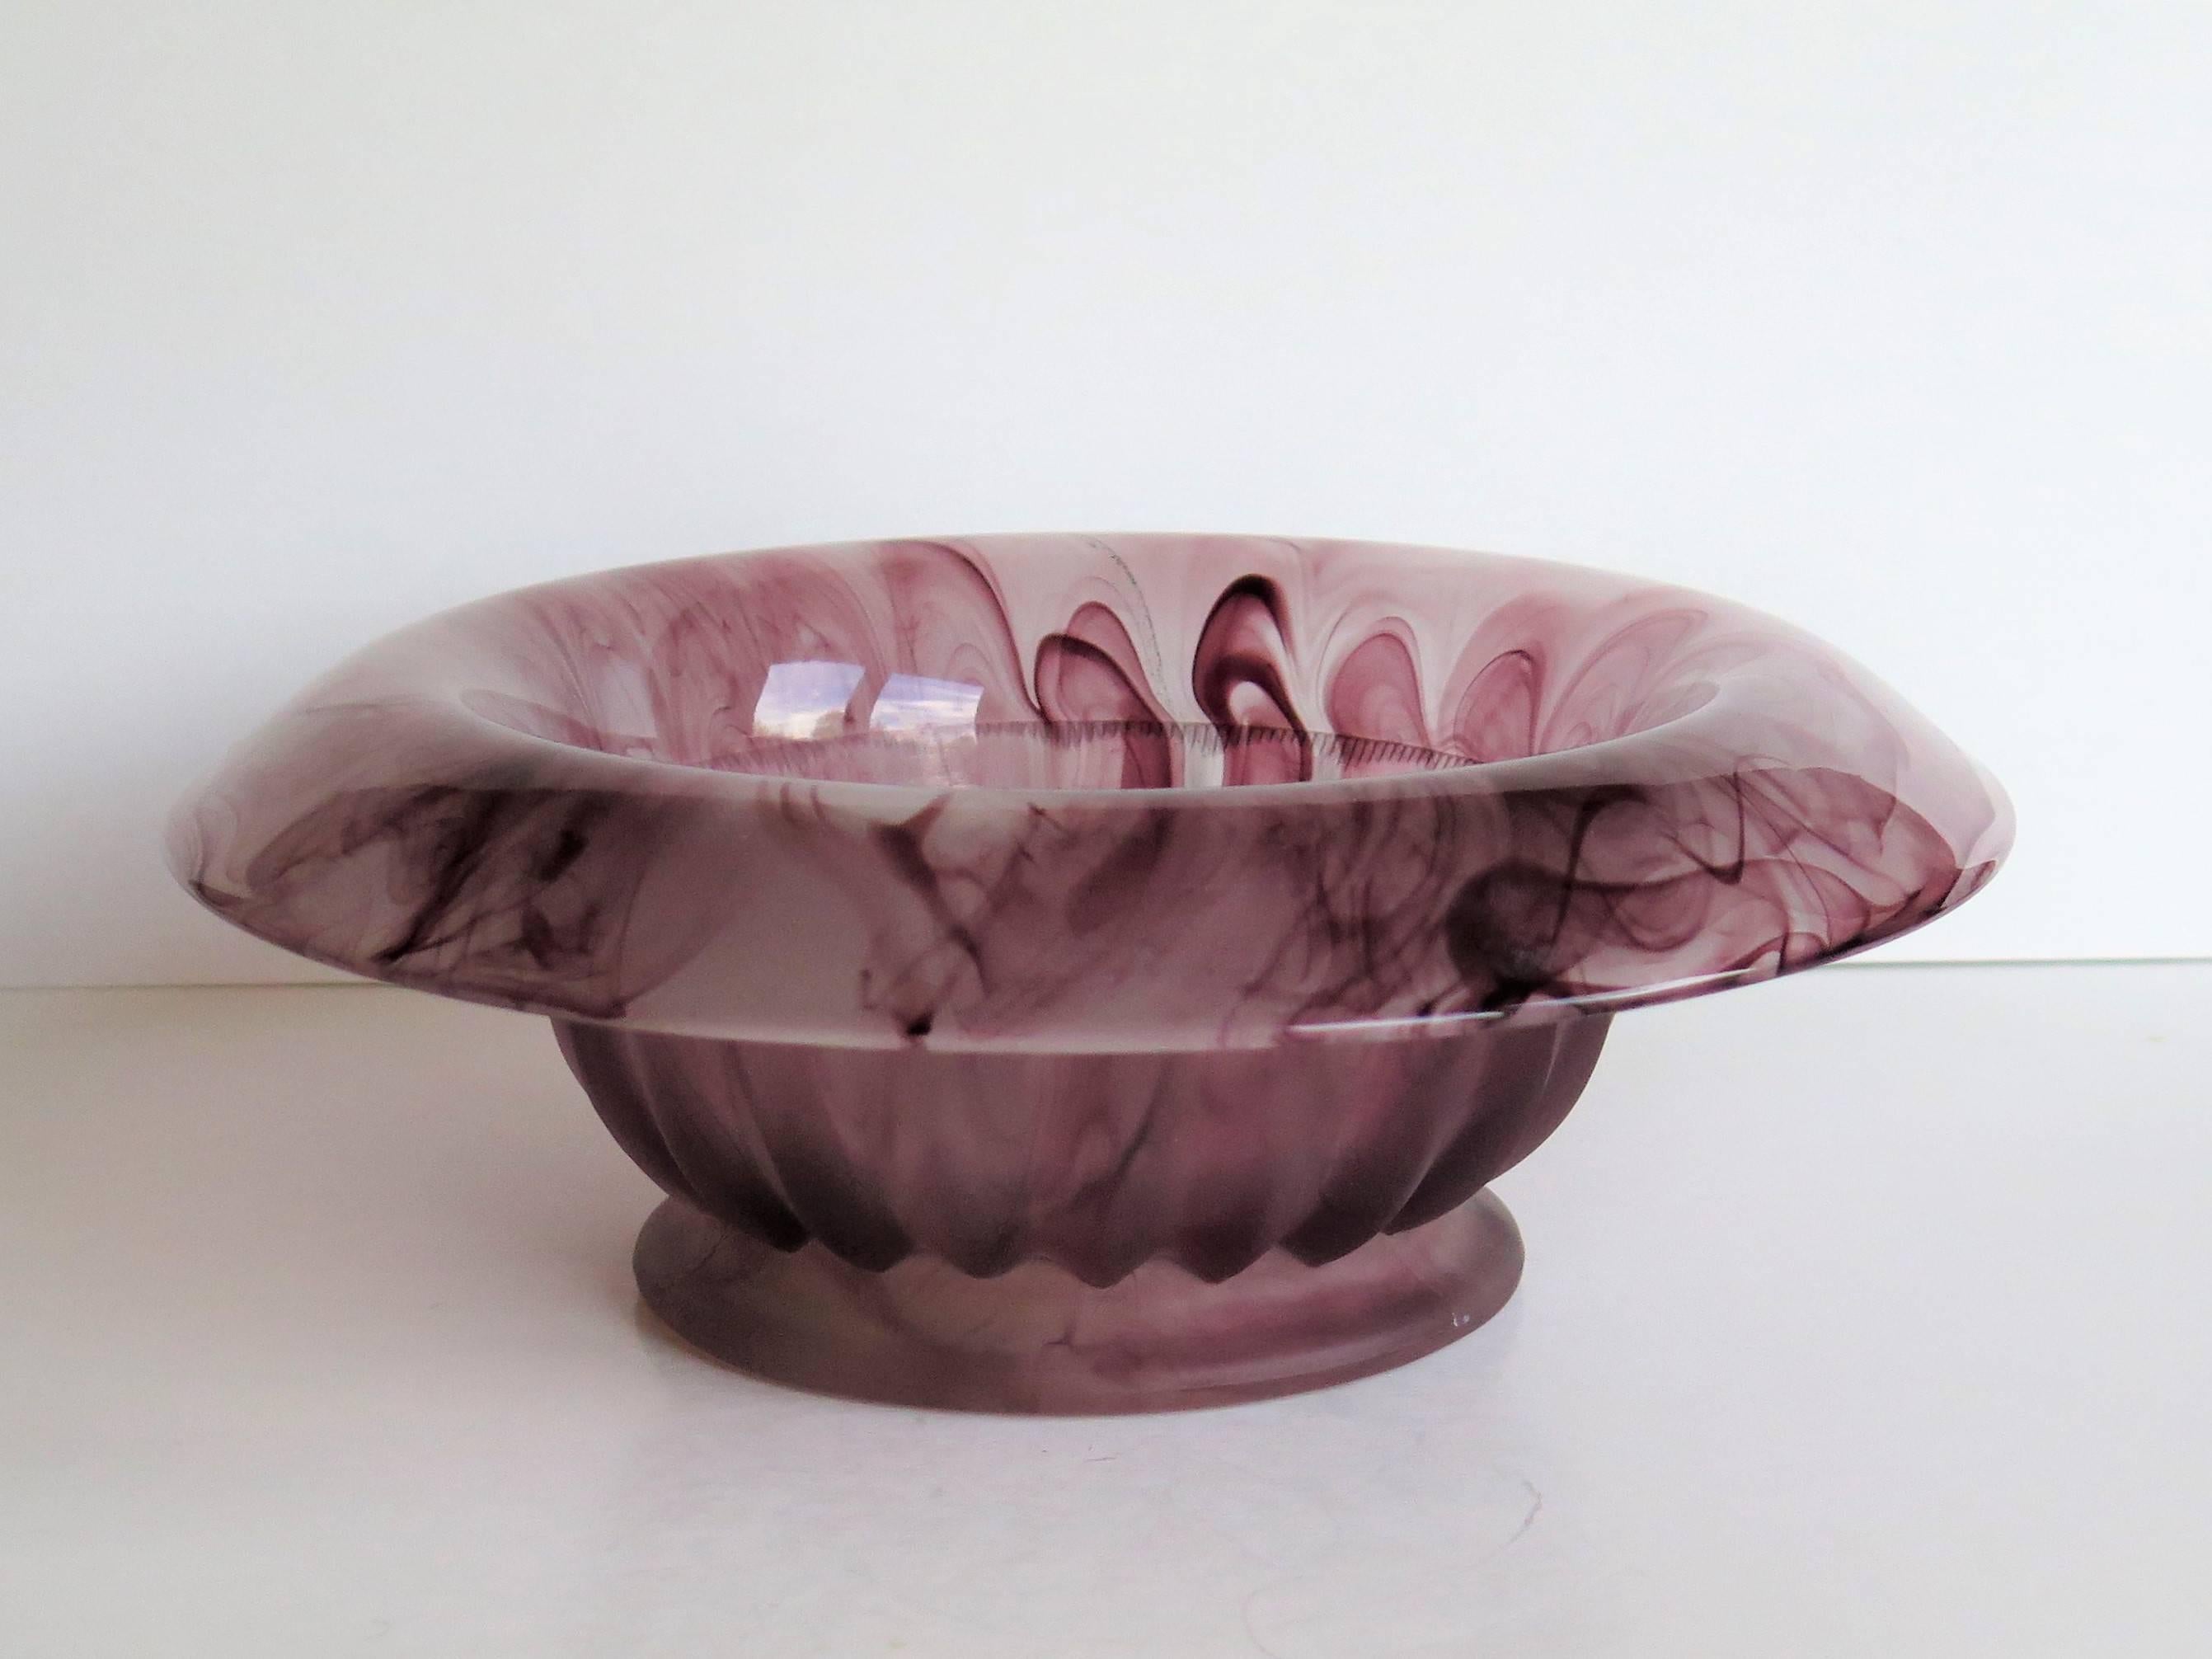 This is a beautiful glass bowl made by George Davidson and Co. of Gateshead, England who started production of cloud glass in 1923.

This bowl has a roll-over rim and is shape or pattern 1910BD as seen in their catalogues of 1931.The bowl has a